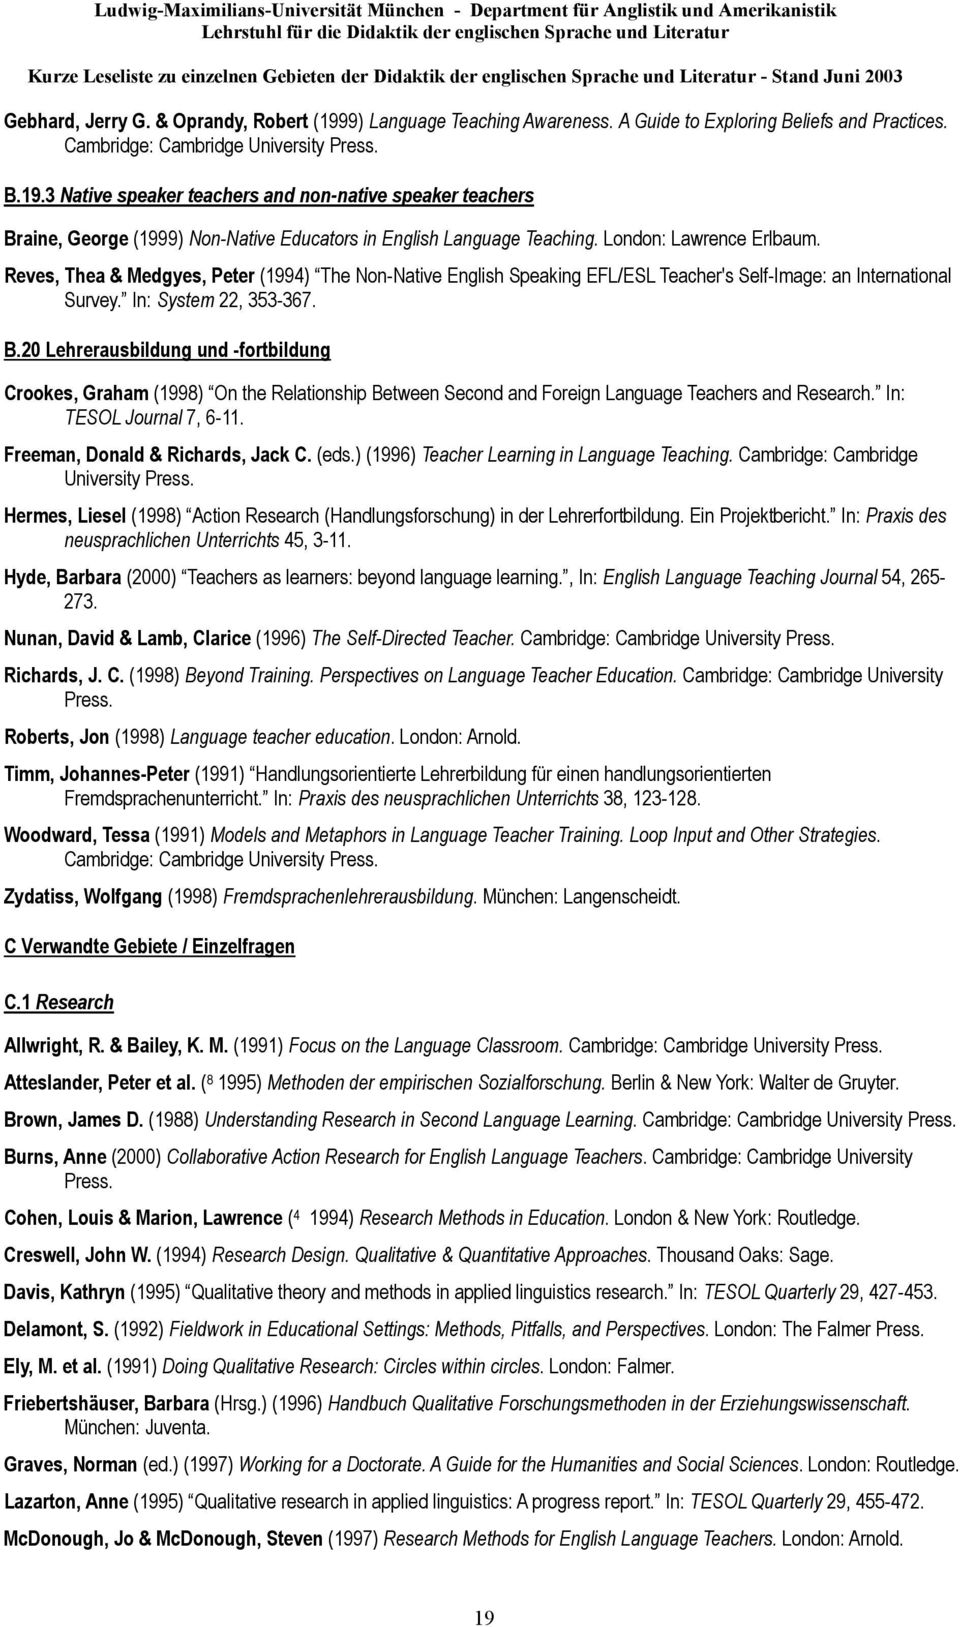 20 Lehrerausbildung und -fortbildung Crookes, Graham (1998) On the Relationship Between Second and Foreign Language Teachers and Research. In: TESOL Journal 7, 6-11.